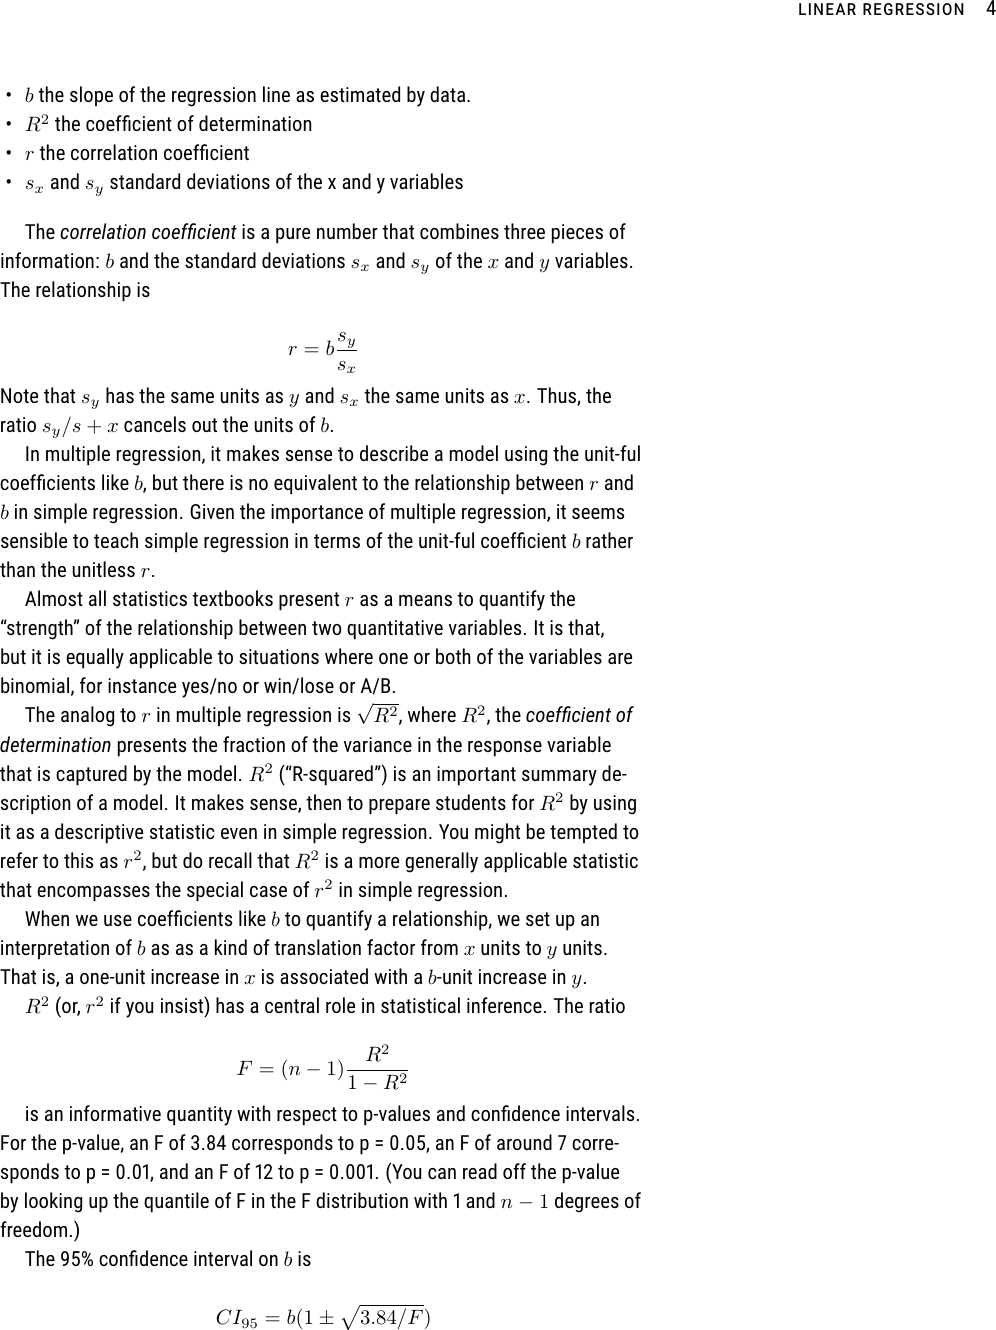 Page 4 of 9 - Linear Regression Instructions-linear-regression